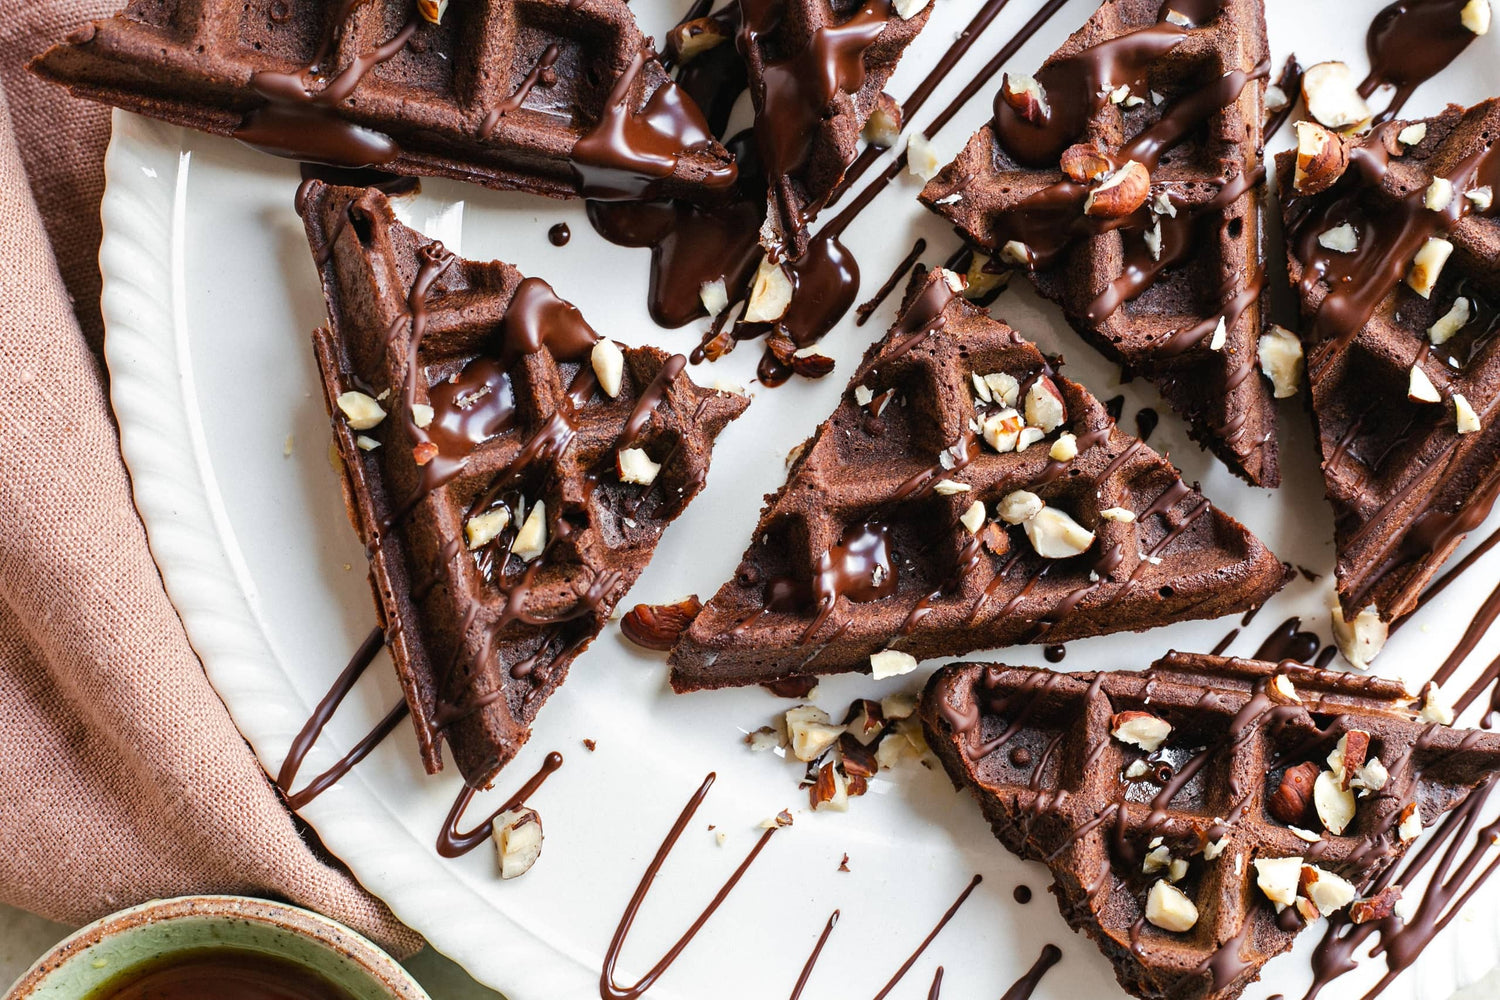 A plate of chocolate waffles drizzled in chocolate sauce and topped with chopped nuts